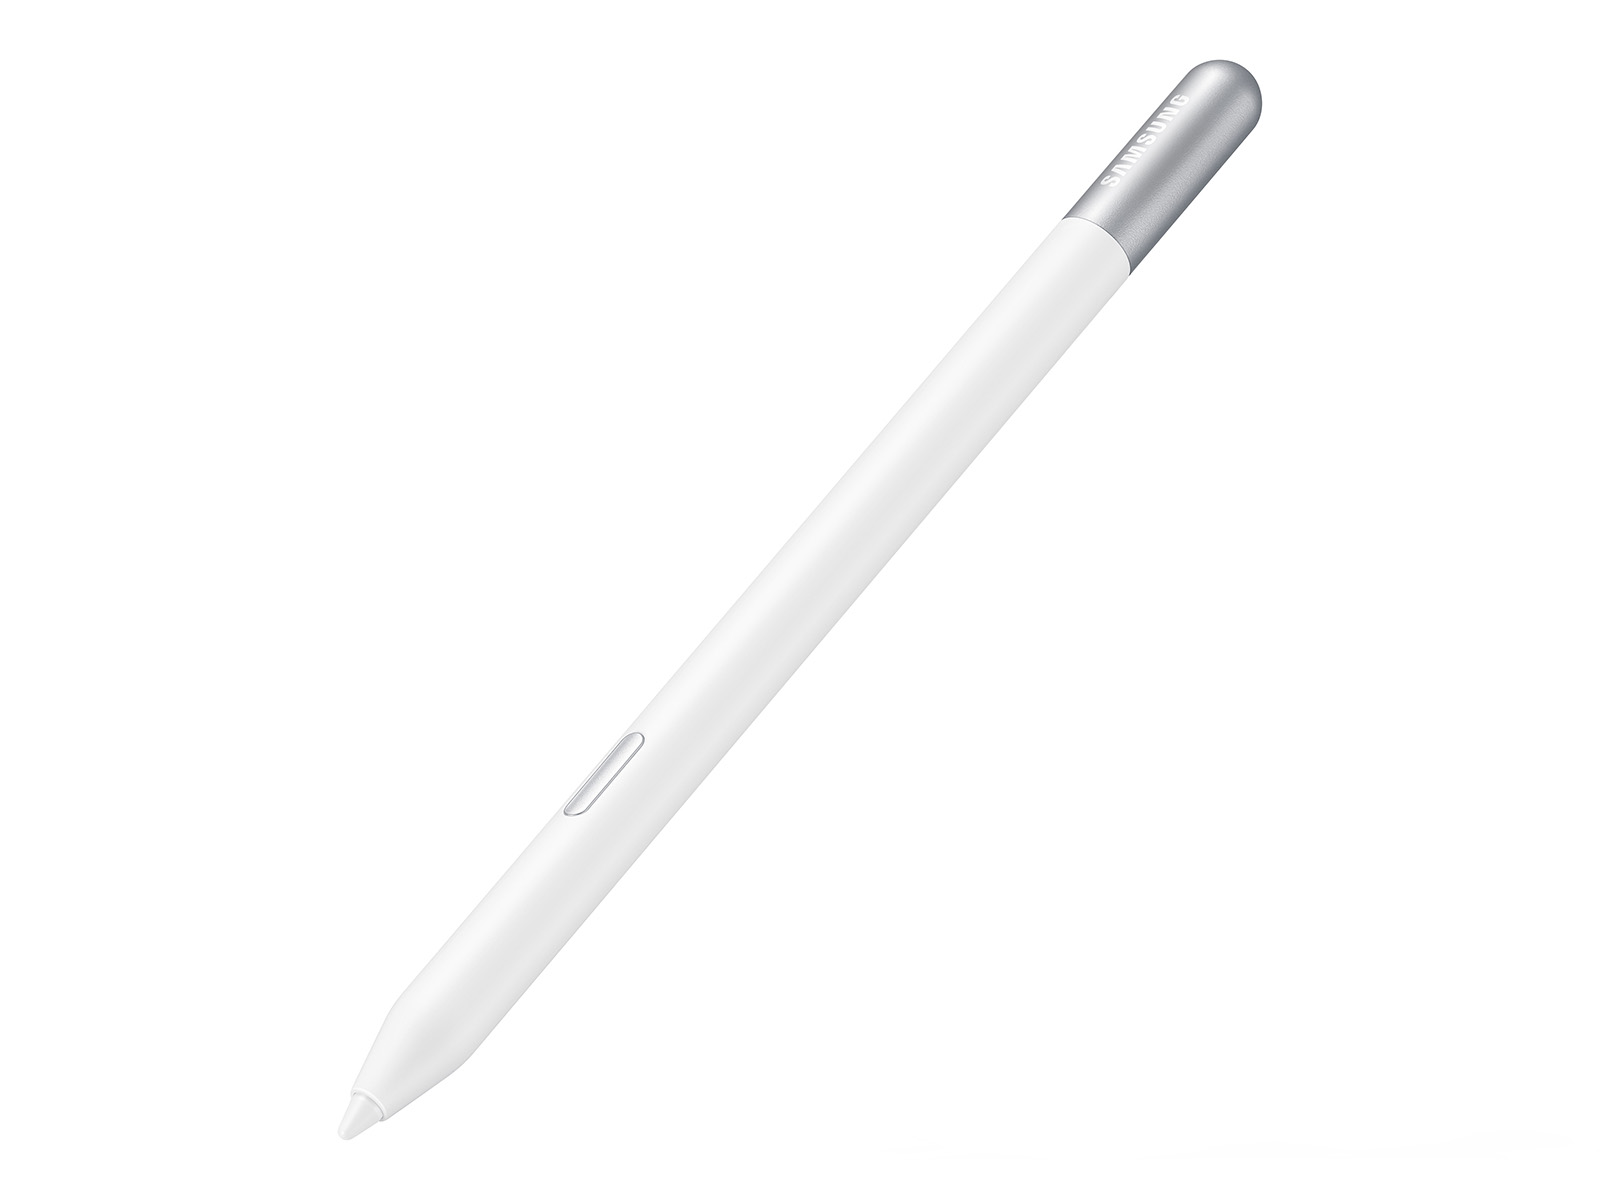 Samsung S Pen Pro compatibility list - here's what Samsung Galaxy